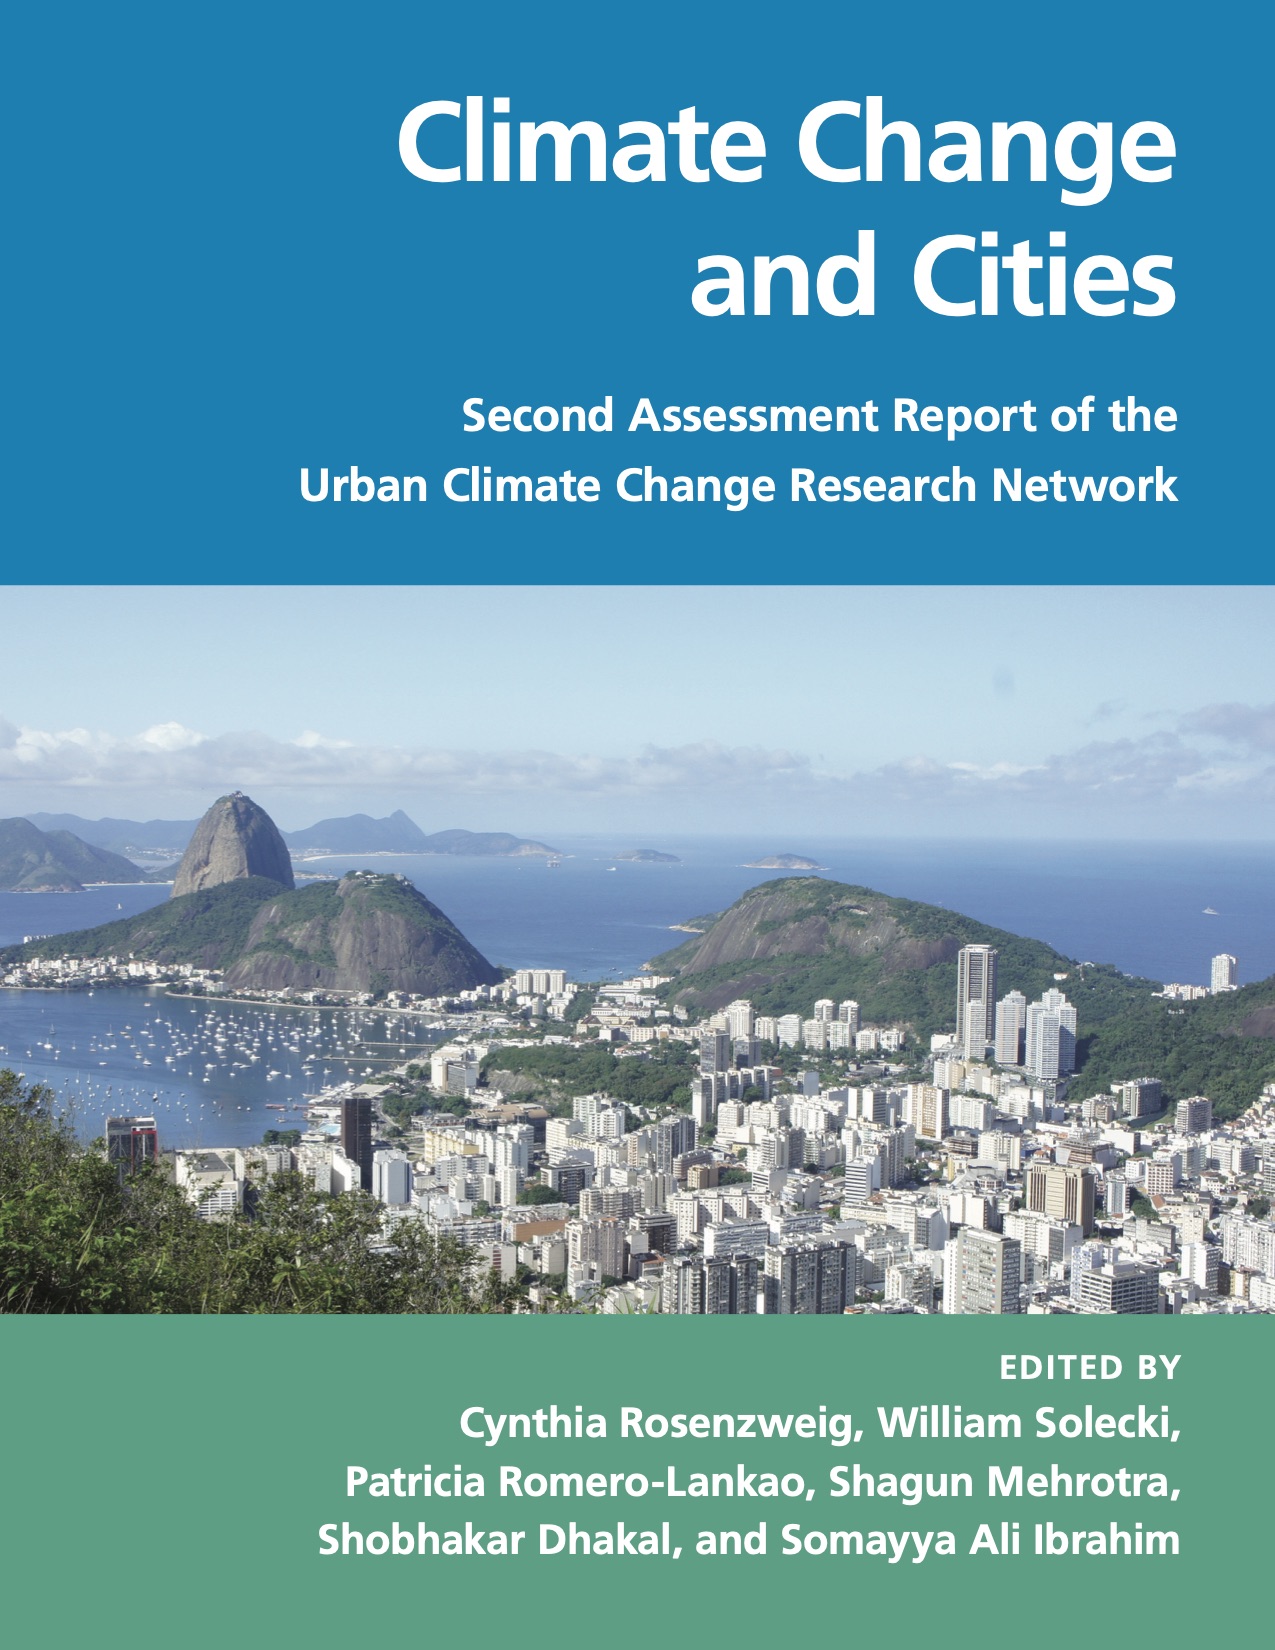 Urban Climate Change Research Network’s Second Assessment Report on Climate Change in Cities 